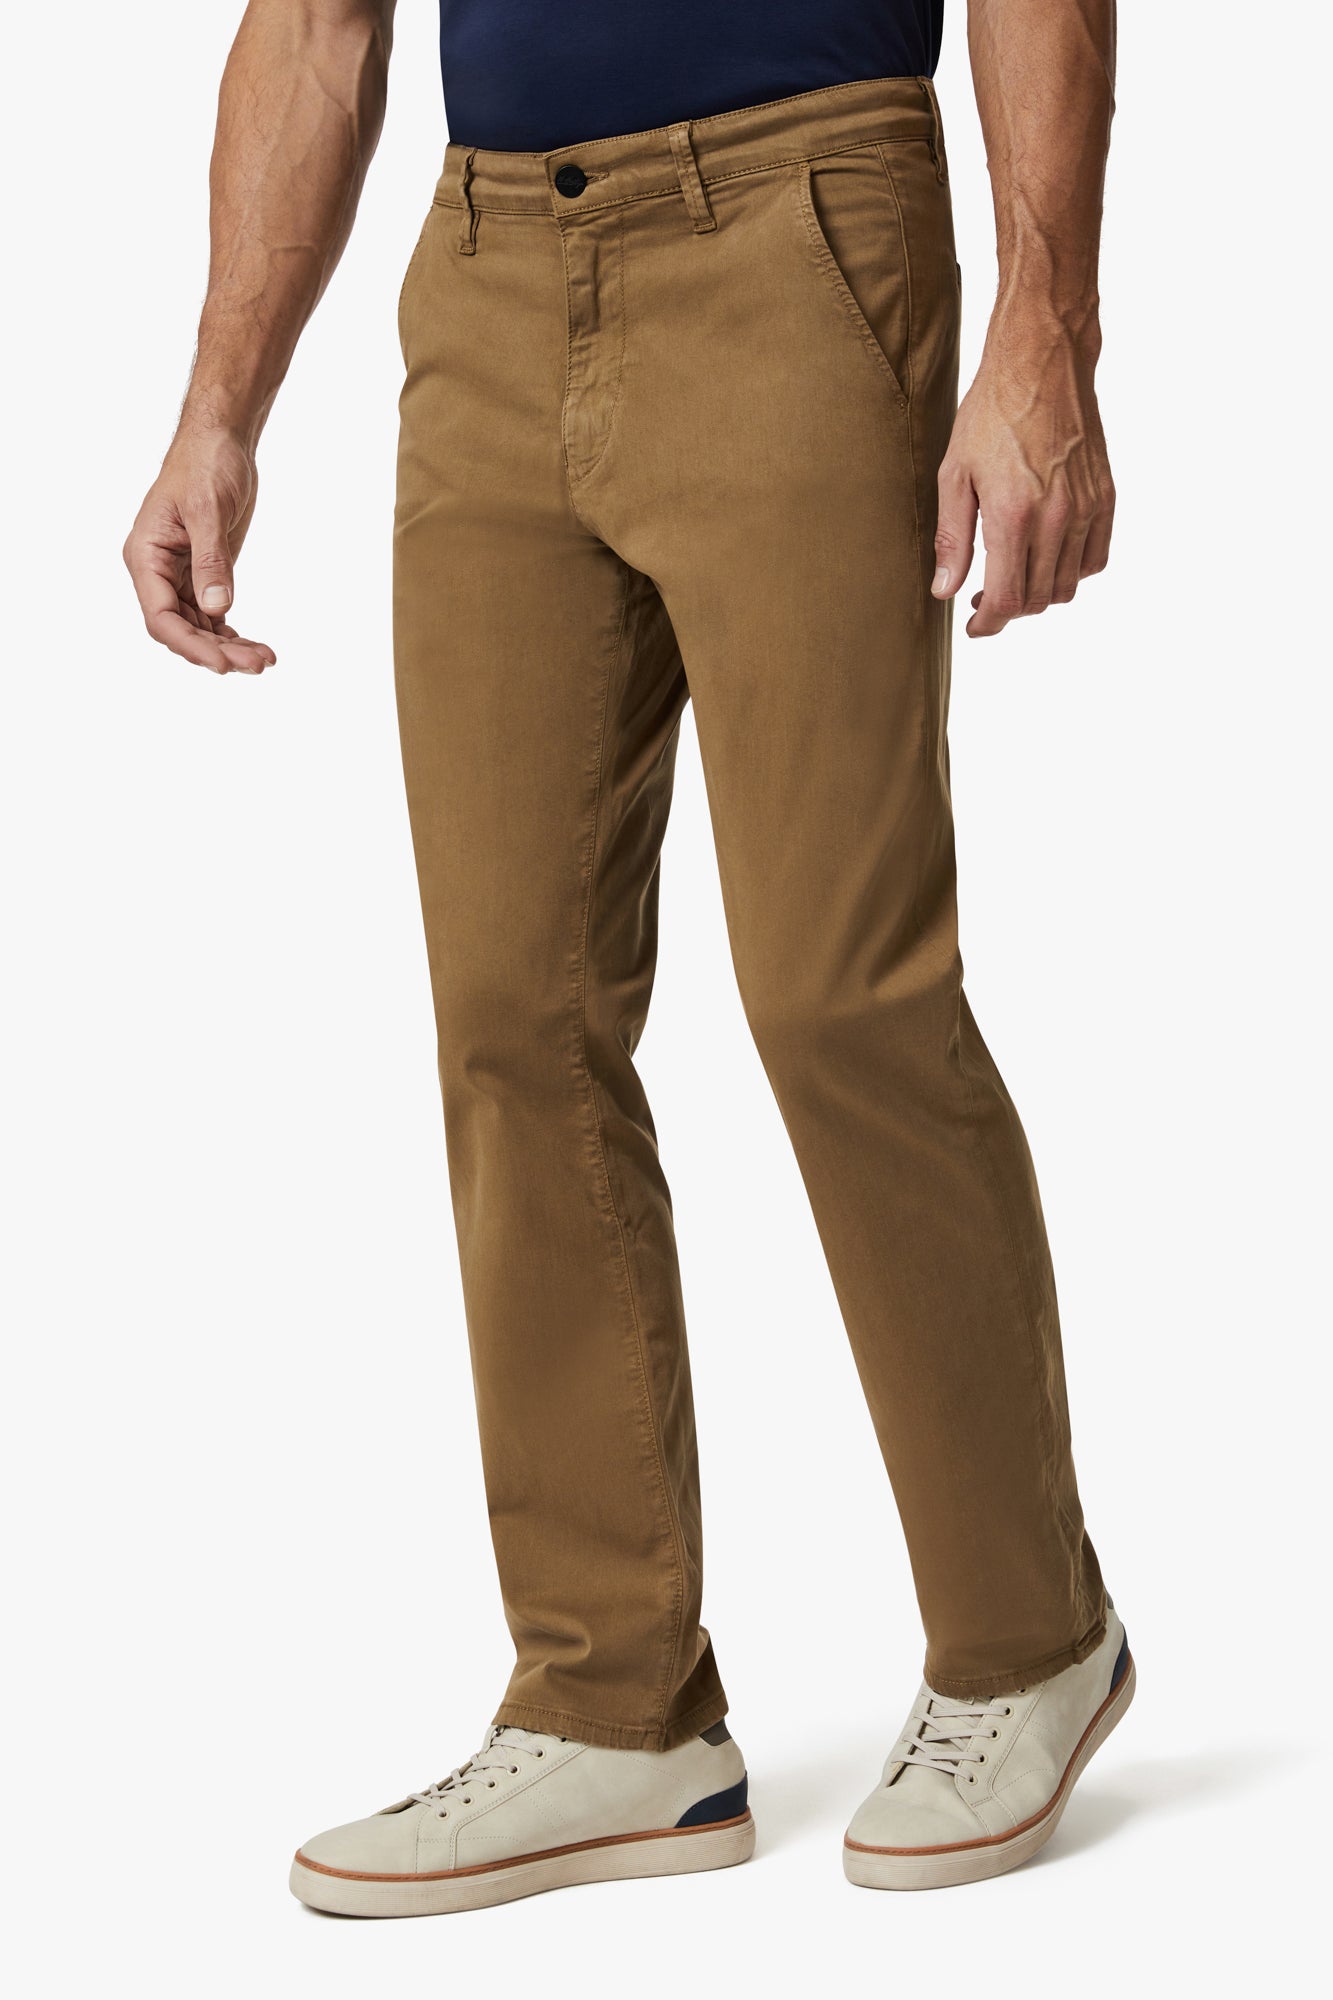 Charisma Relaxed Straight Chino Pants In Tobacco twill